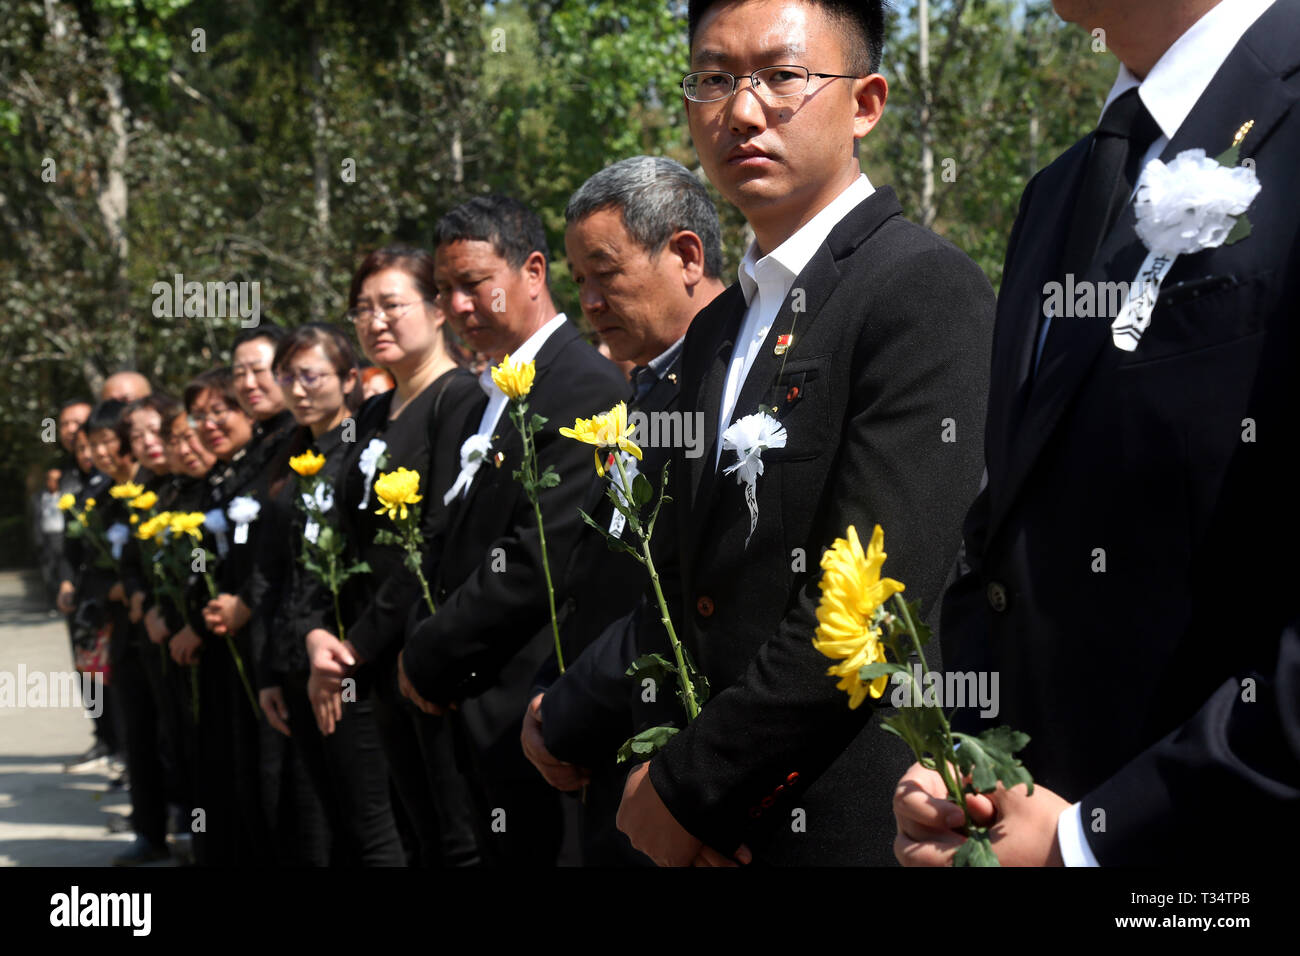 Liangshan, Xichang of Liangshan Yi Autonomous Prefecture in southwest China's Sichuan Province. 6th Apr, 2019. People attend a burial ceremony for the bone ashes of fireman Zhang Hao, who died while fighting a forest fire in Muli, Sichuan Province, at a martyrs' cemetery in Xichang of Liangshan Yi Autonomous Prefecture in southwest China's Sichuan Province, April 6, 2019. Credit: Li Jieyi/Xinhua/Alamy Live News Stock Photo